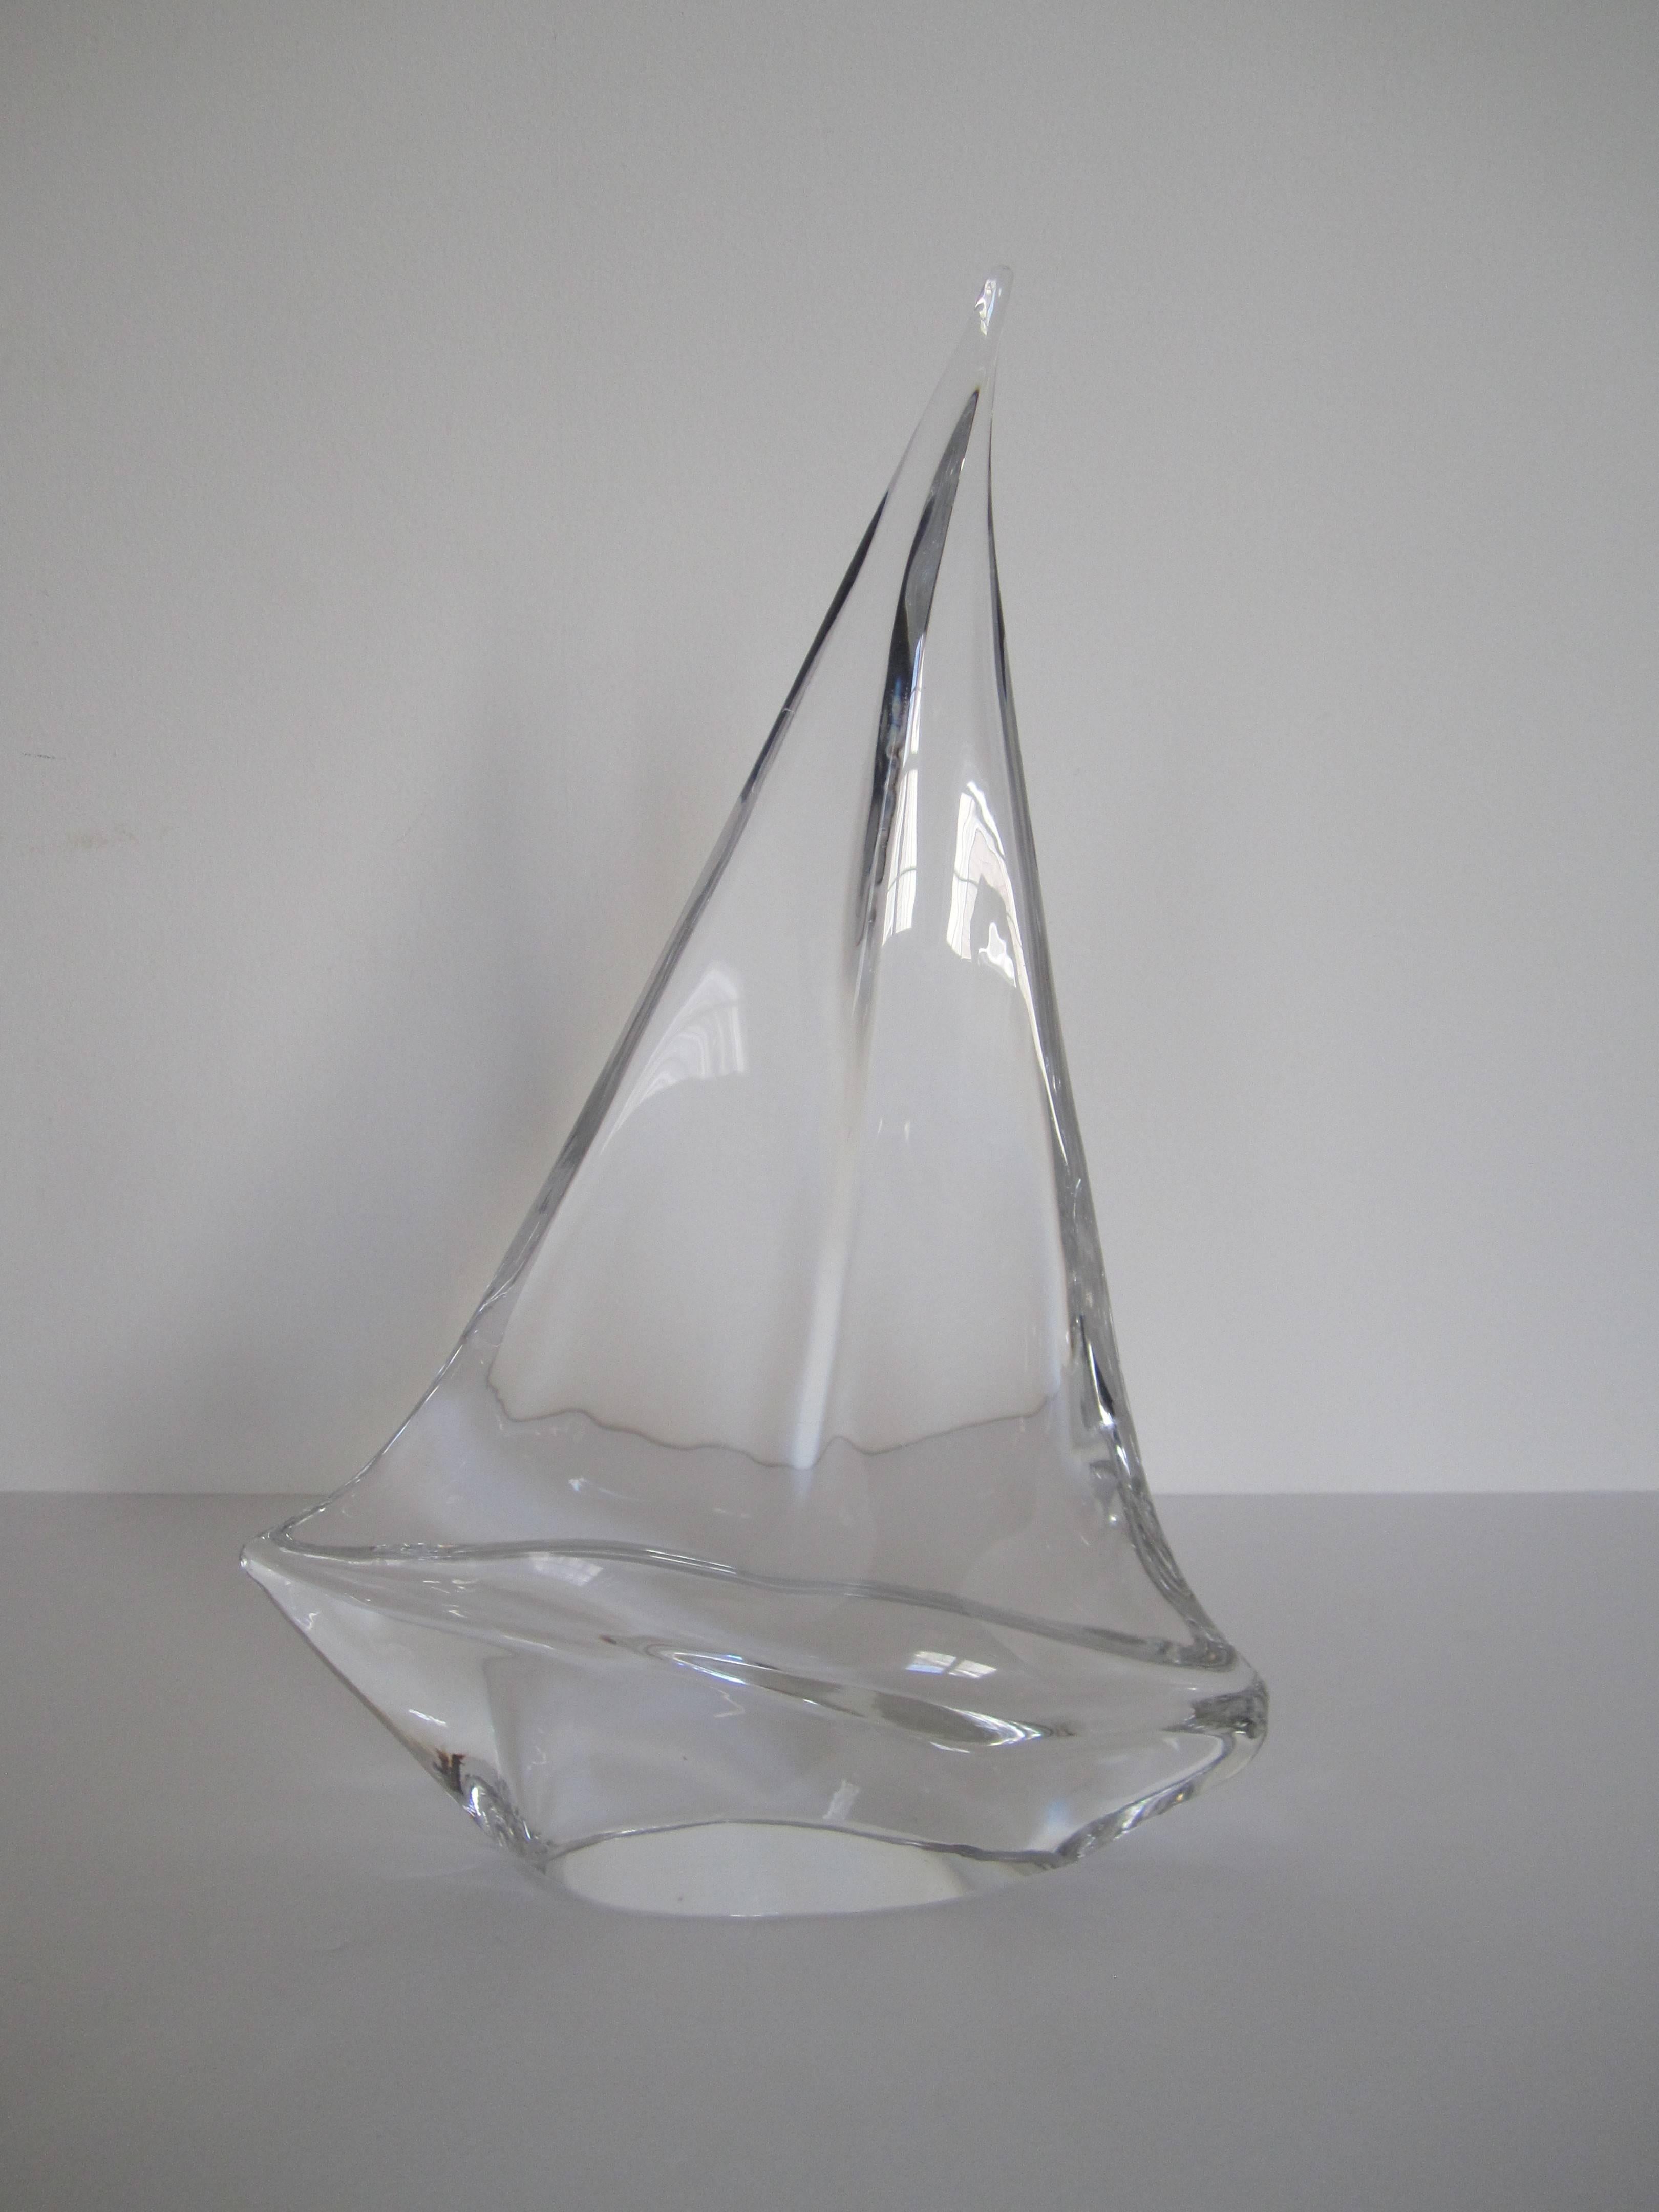 A substantial sculpture of a sailboat yacht by French luxury crystal maker Daum. Piece is signed DAUM. Excellent condition. Made in France.

Measuring 13.5 in. H. 

Item available here online. By request, item can be made available by appointment to